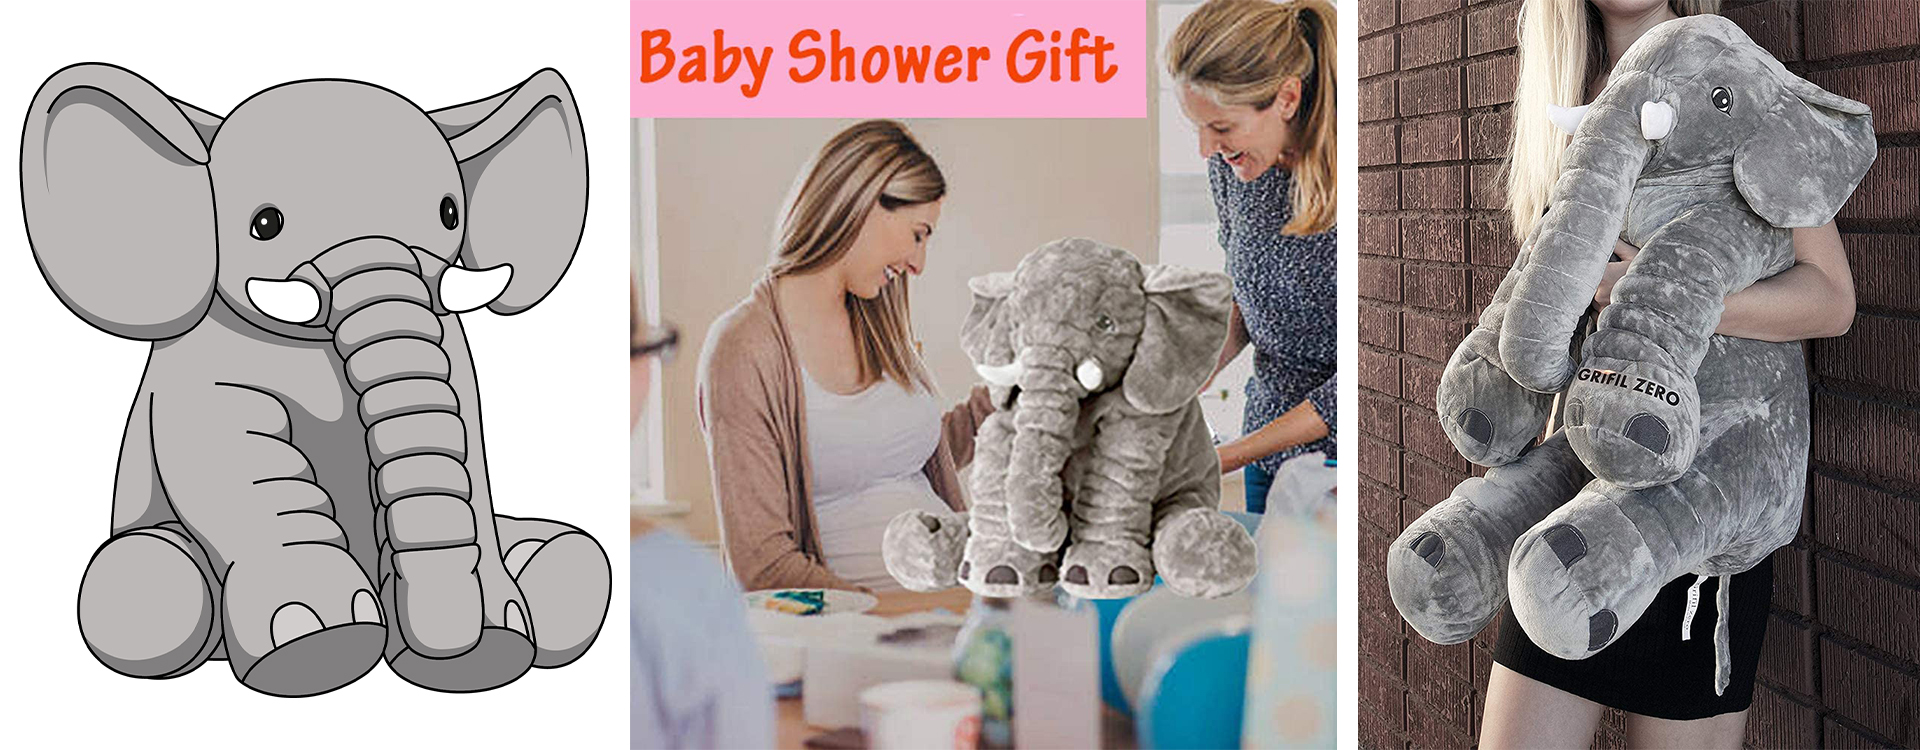 Plush Elephant toy as an Appeasing Gift for adult